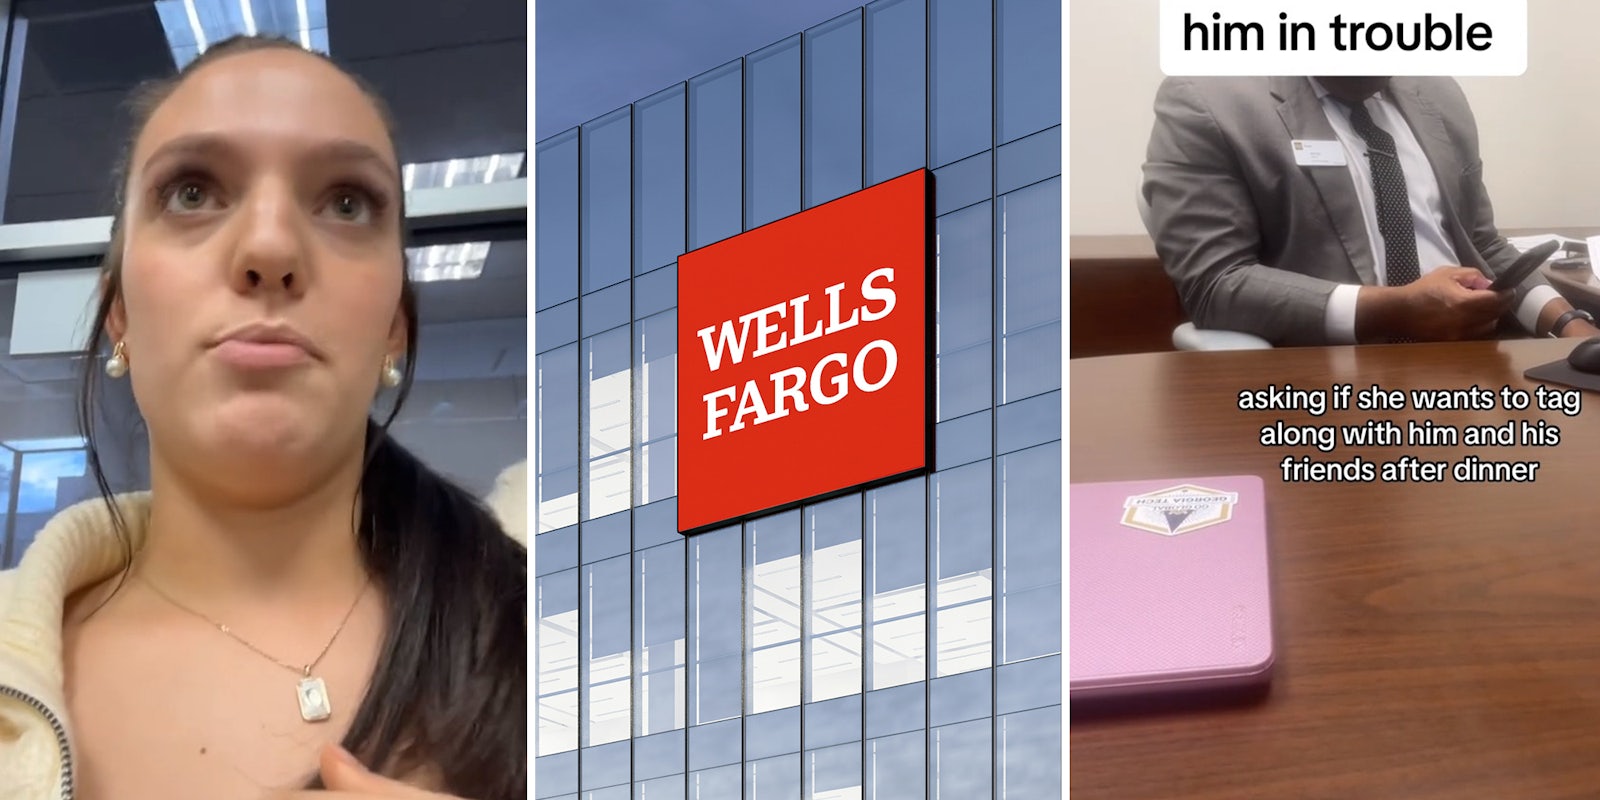 Woman goes into Wells Fargo to open a new account. She ends up helping bank teller with something unexpected